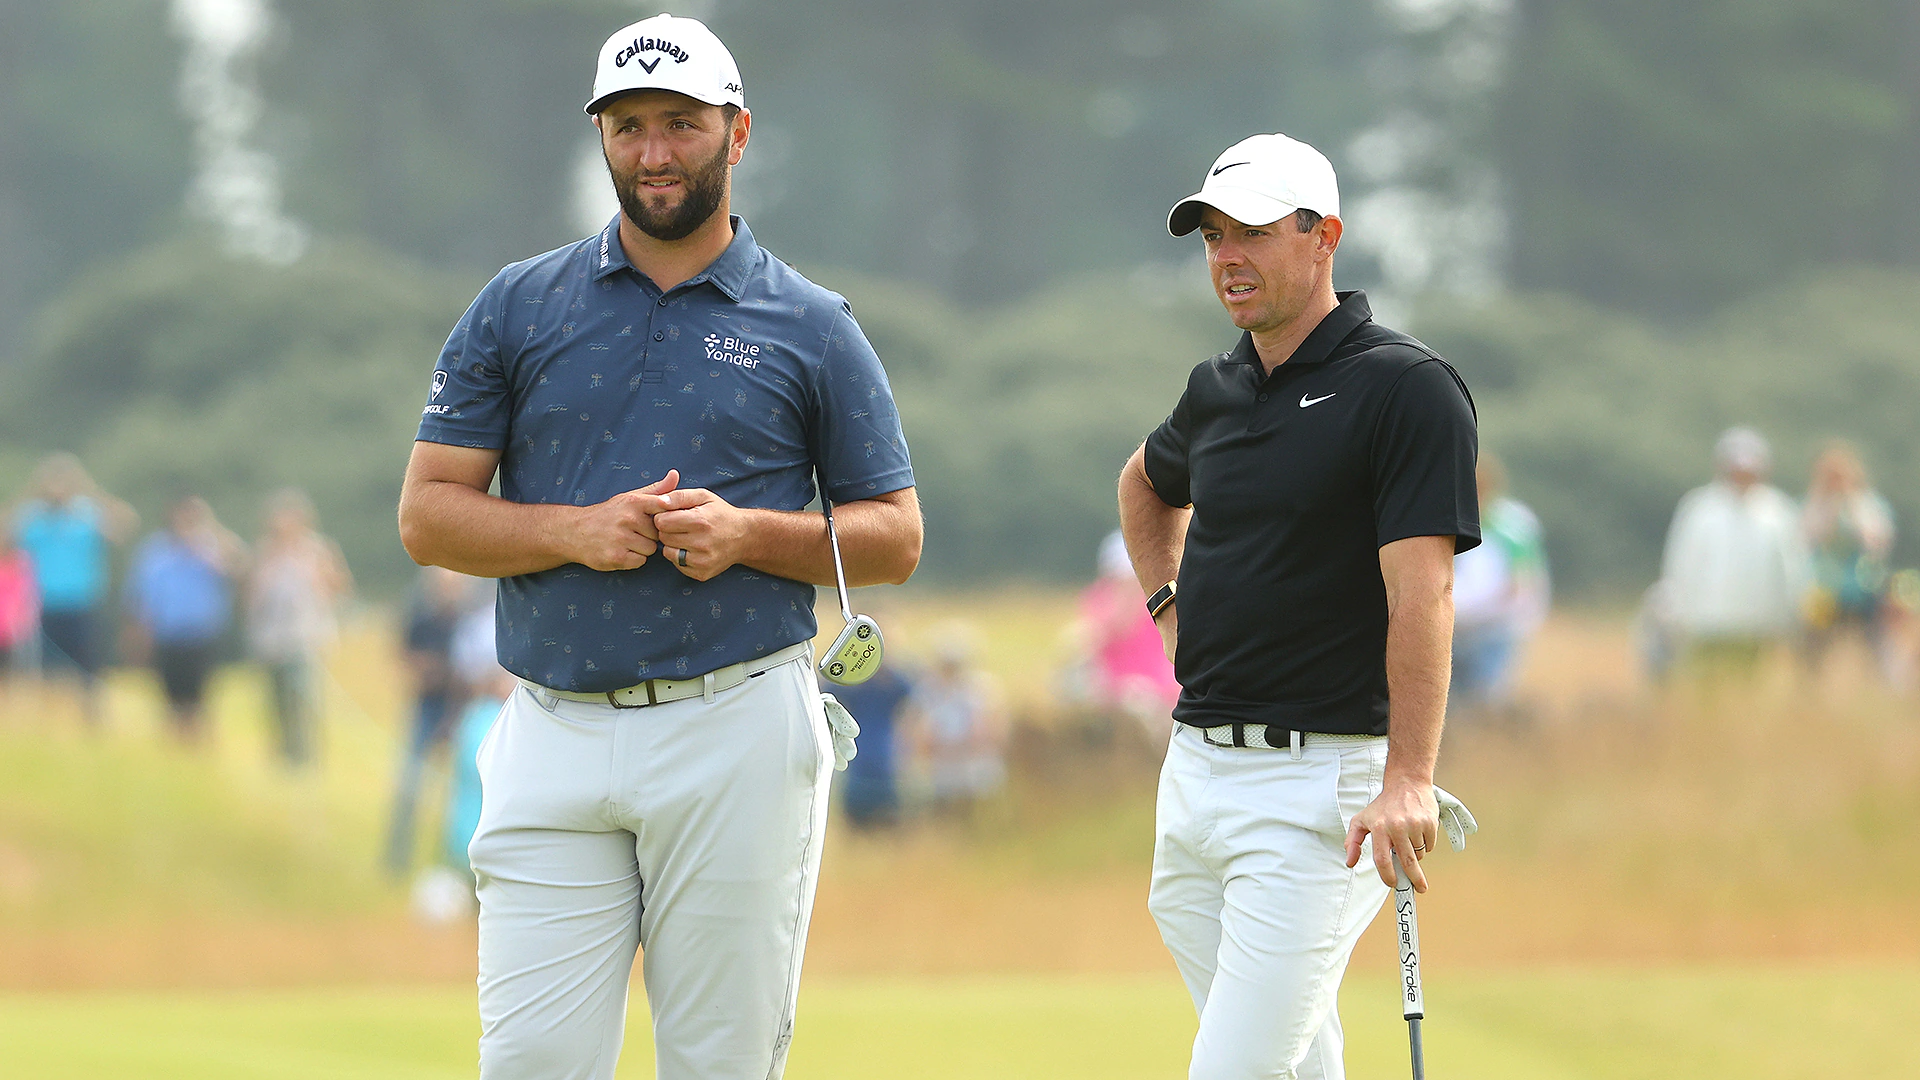 Golf Central Podcast: Comparing Jon Rahm and Rory McIlroy; how should majors respond to LIV?